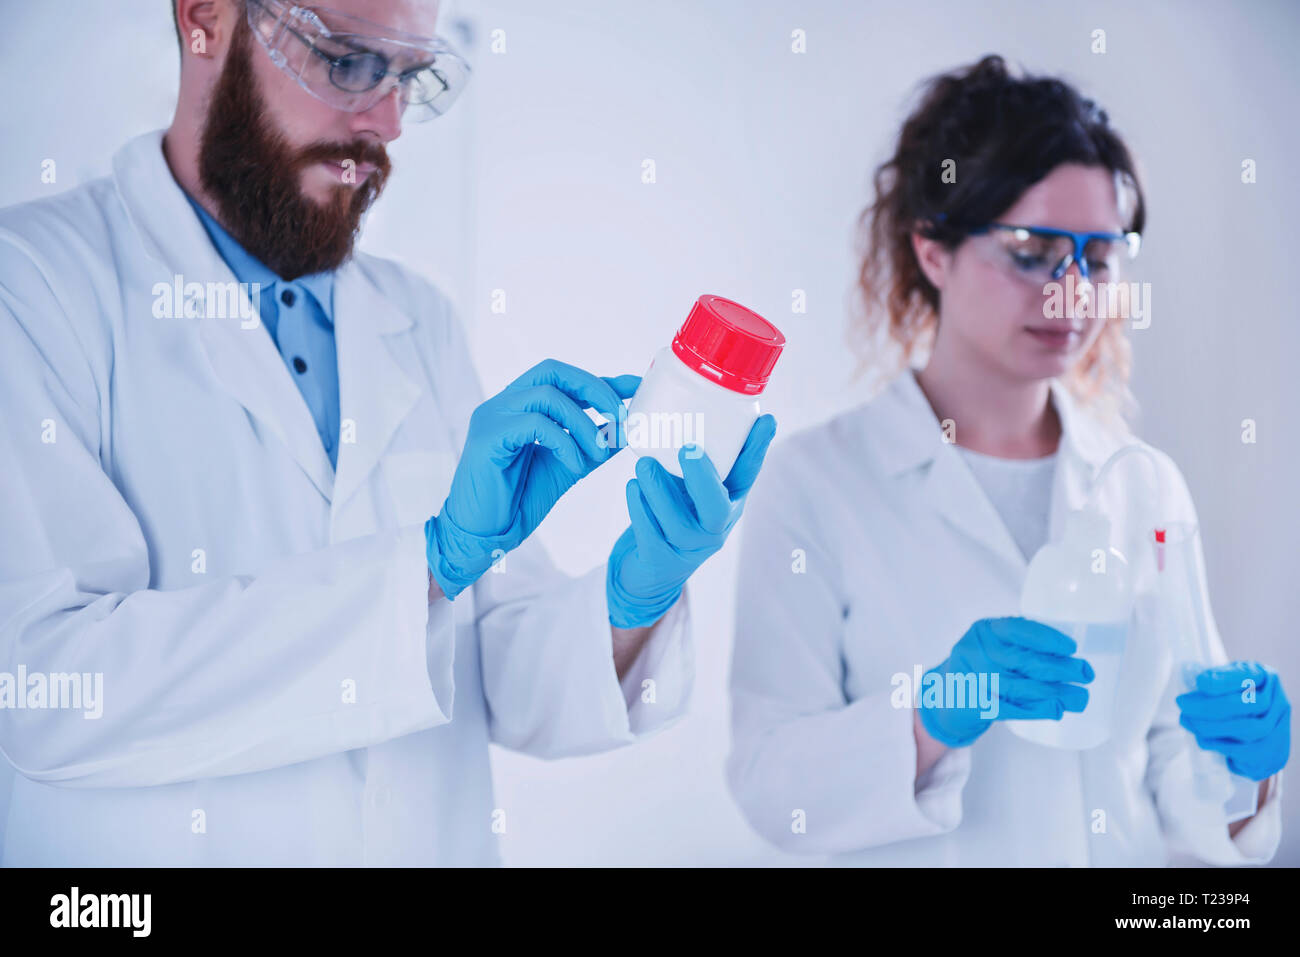 Young researchers working together in the lab, wearing uniform. Stock Photo